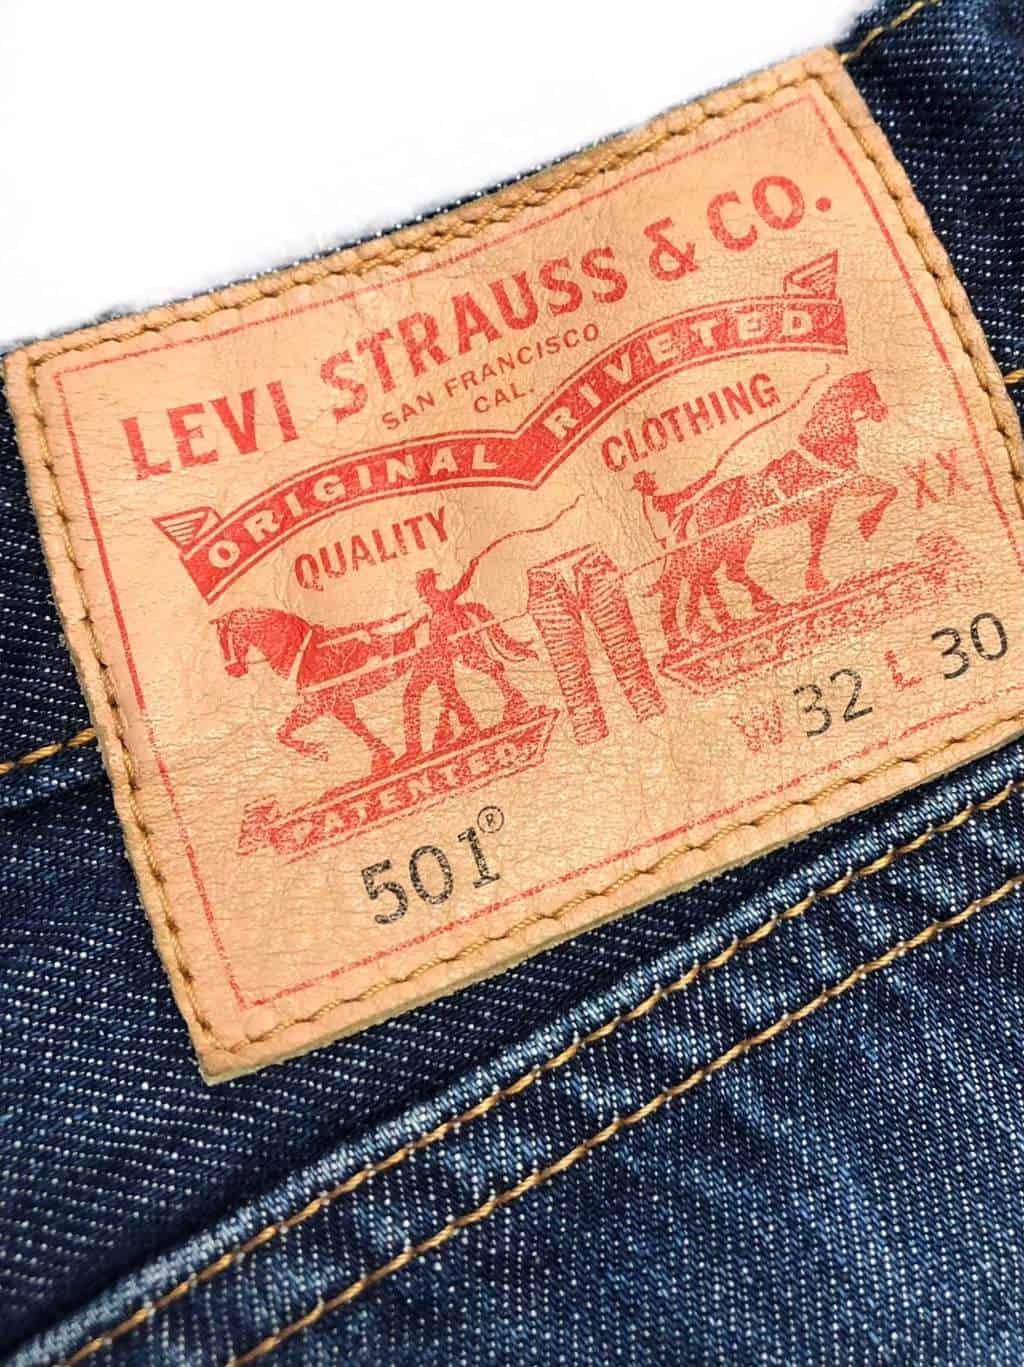 Levis 501 jeans in dark blue denim with whiskered hips and leather patch -  W31 x  - St Cyr Vintage